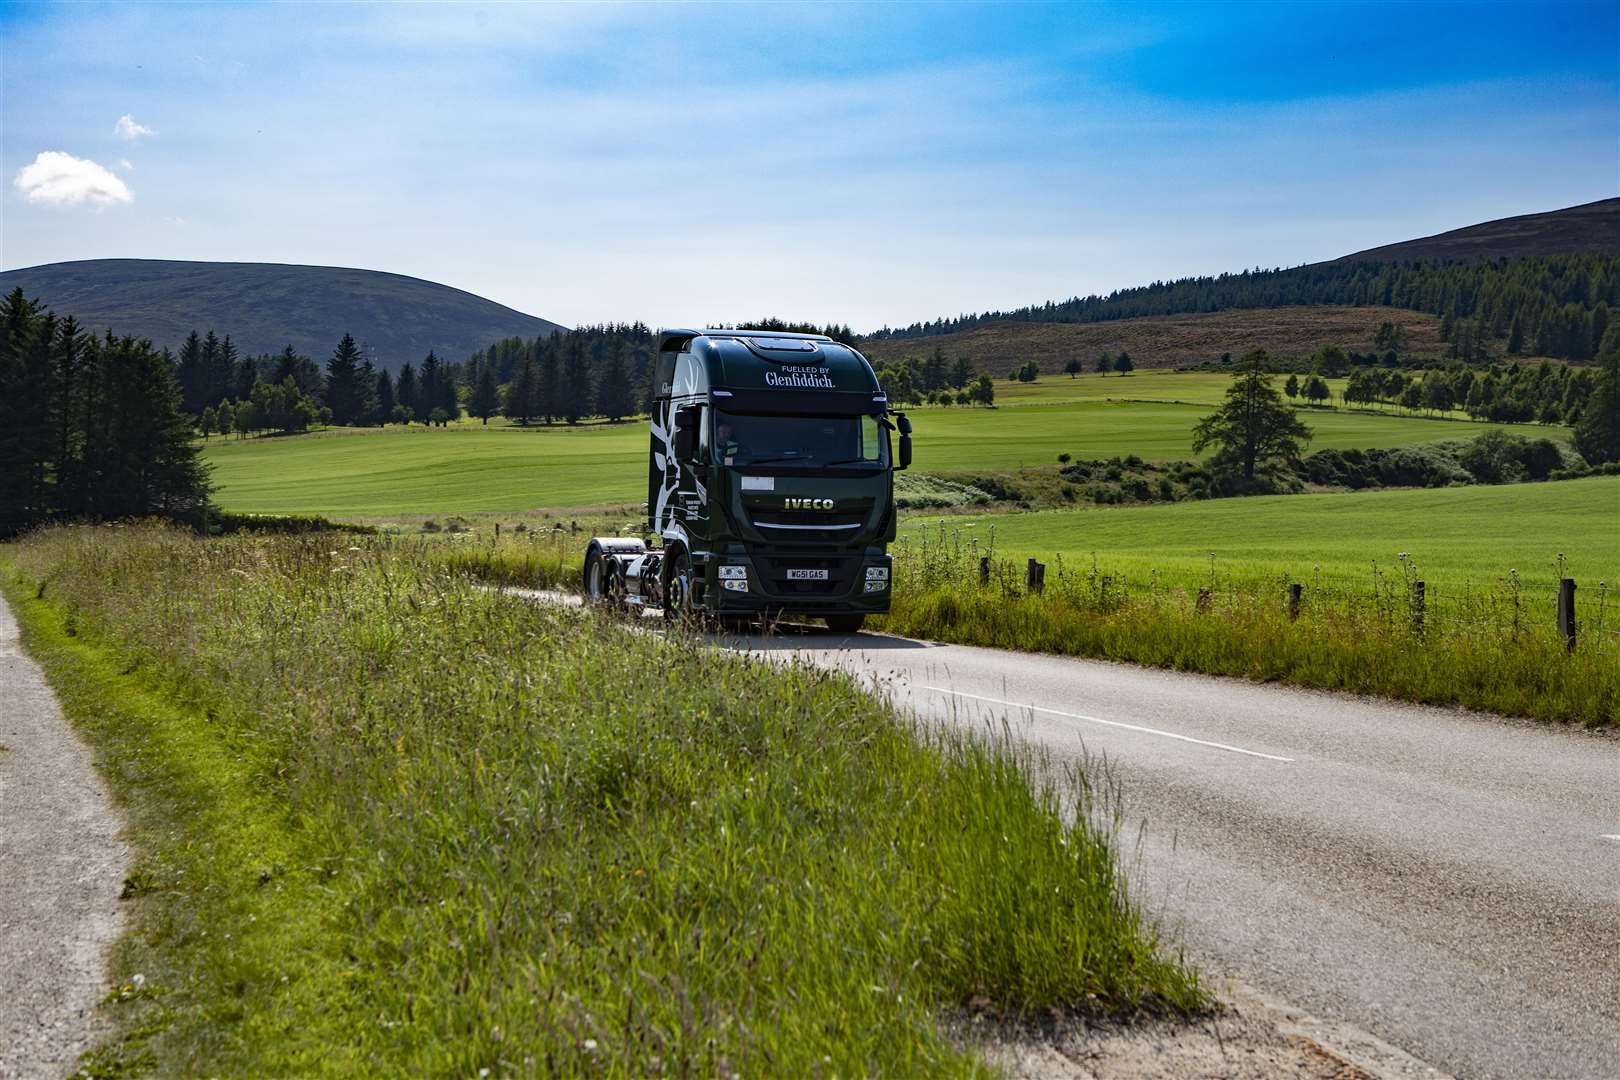 The biogas is now powering specially converted "Fuelled by Glenfiddich" trucks.